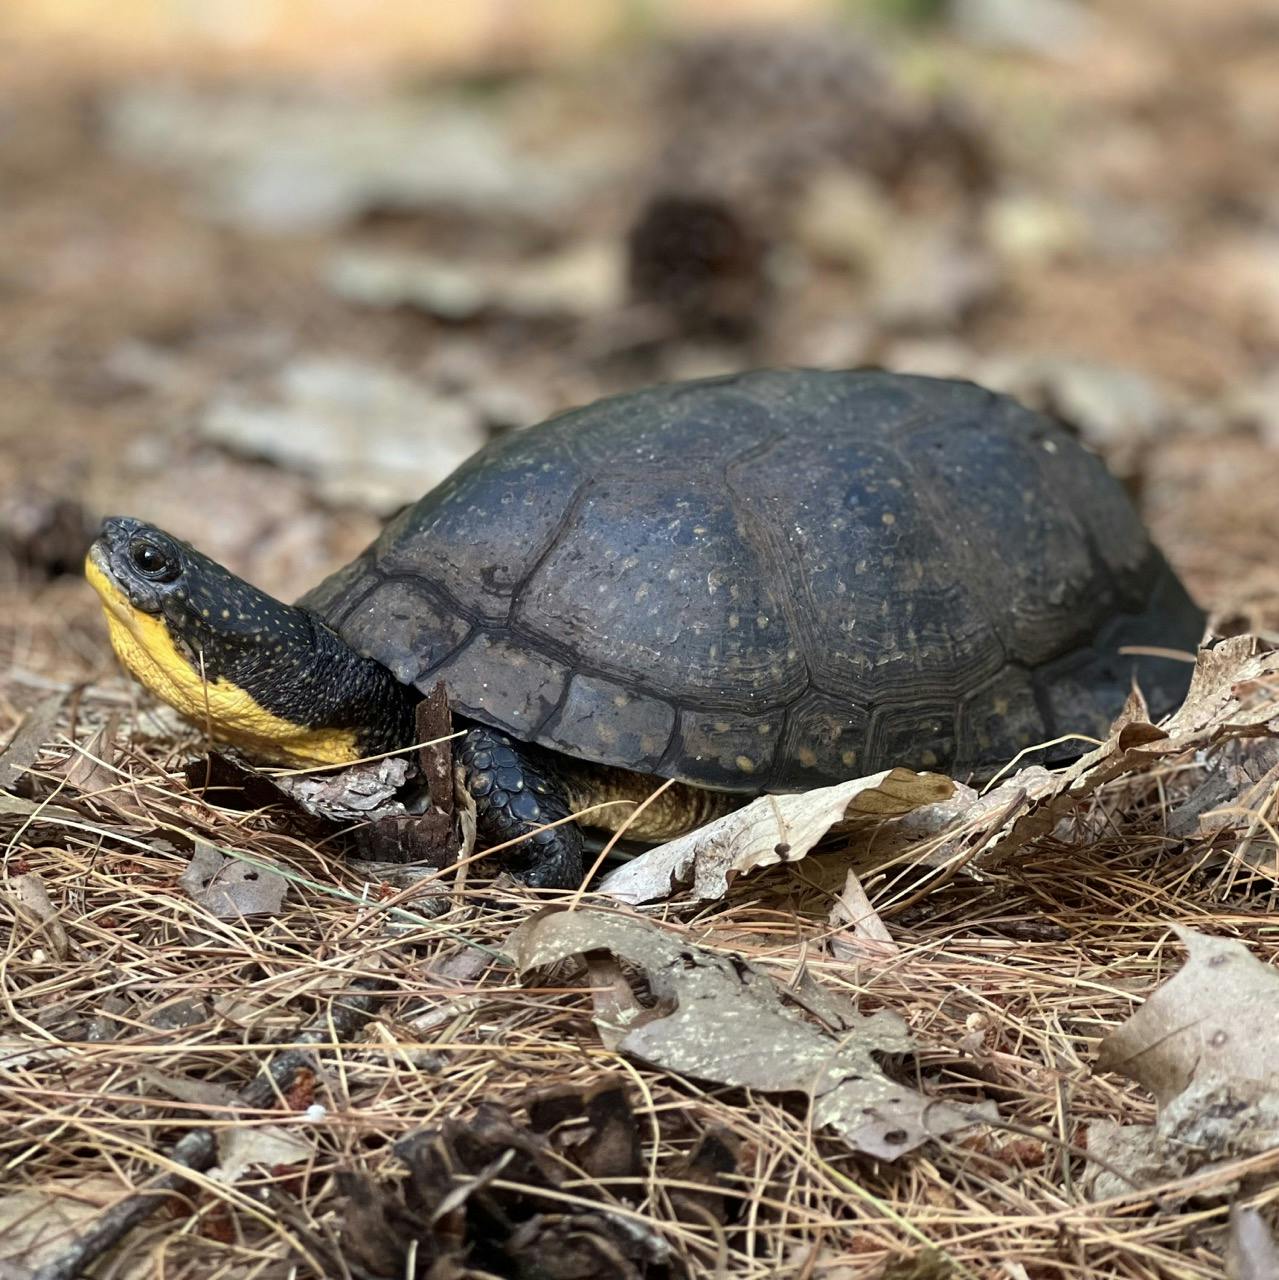 A Blandings turtle on the move